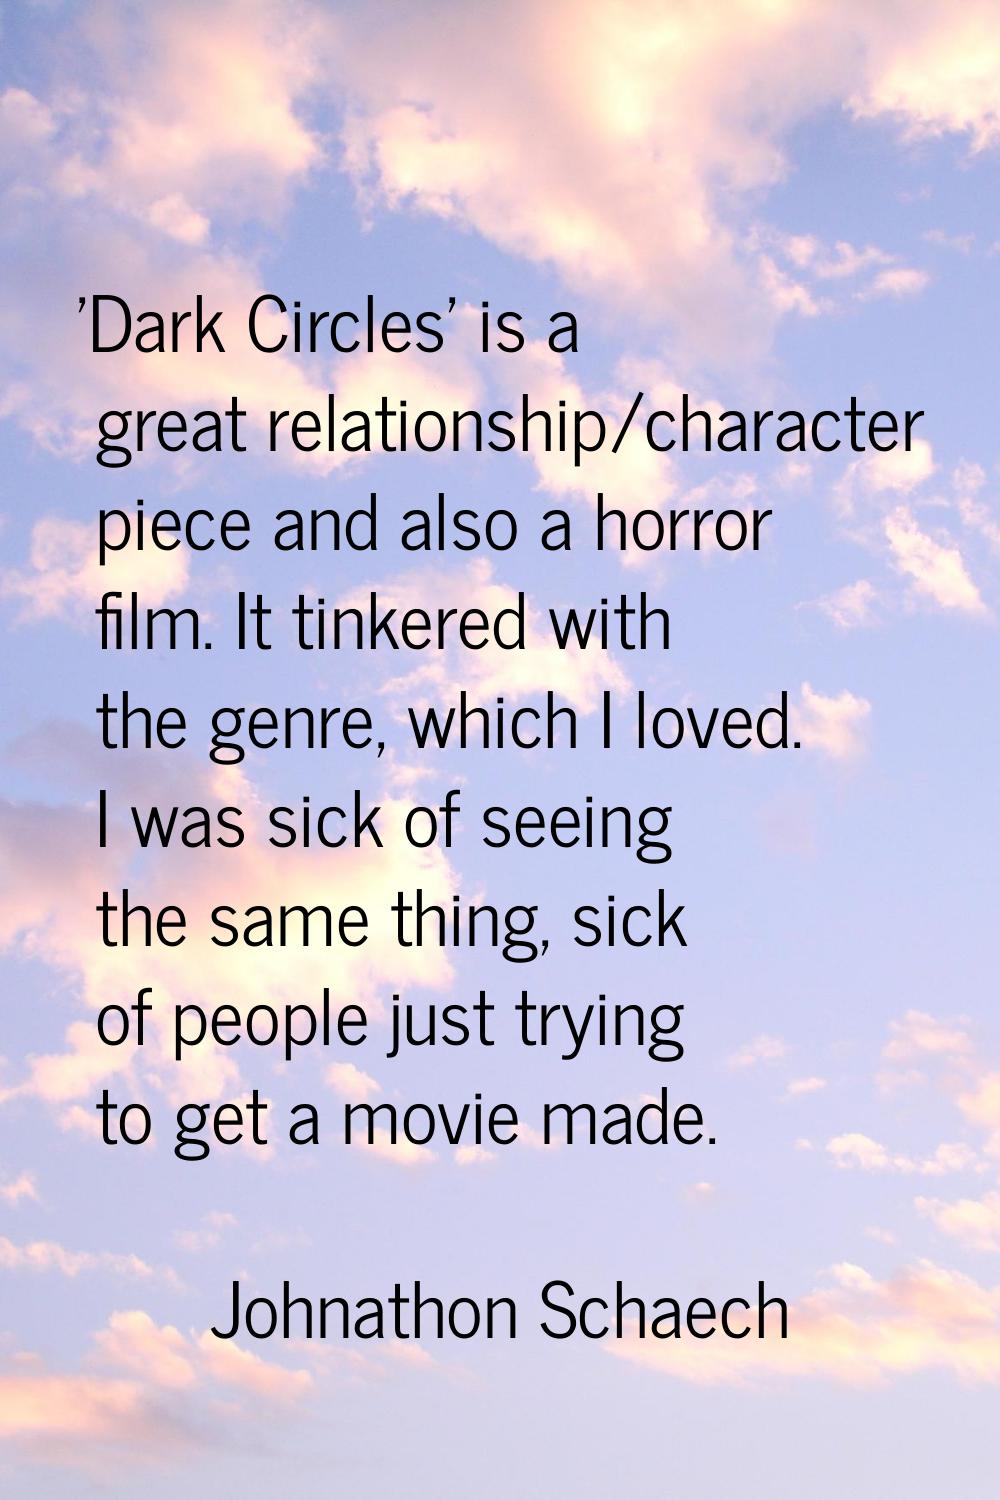 'Dark Circles' is a great relationship/character piece and also a horror film. It tinkered with the